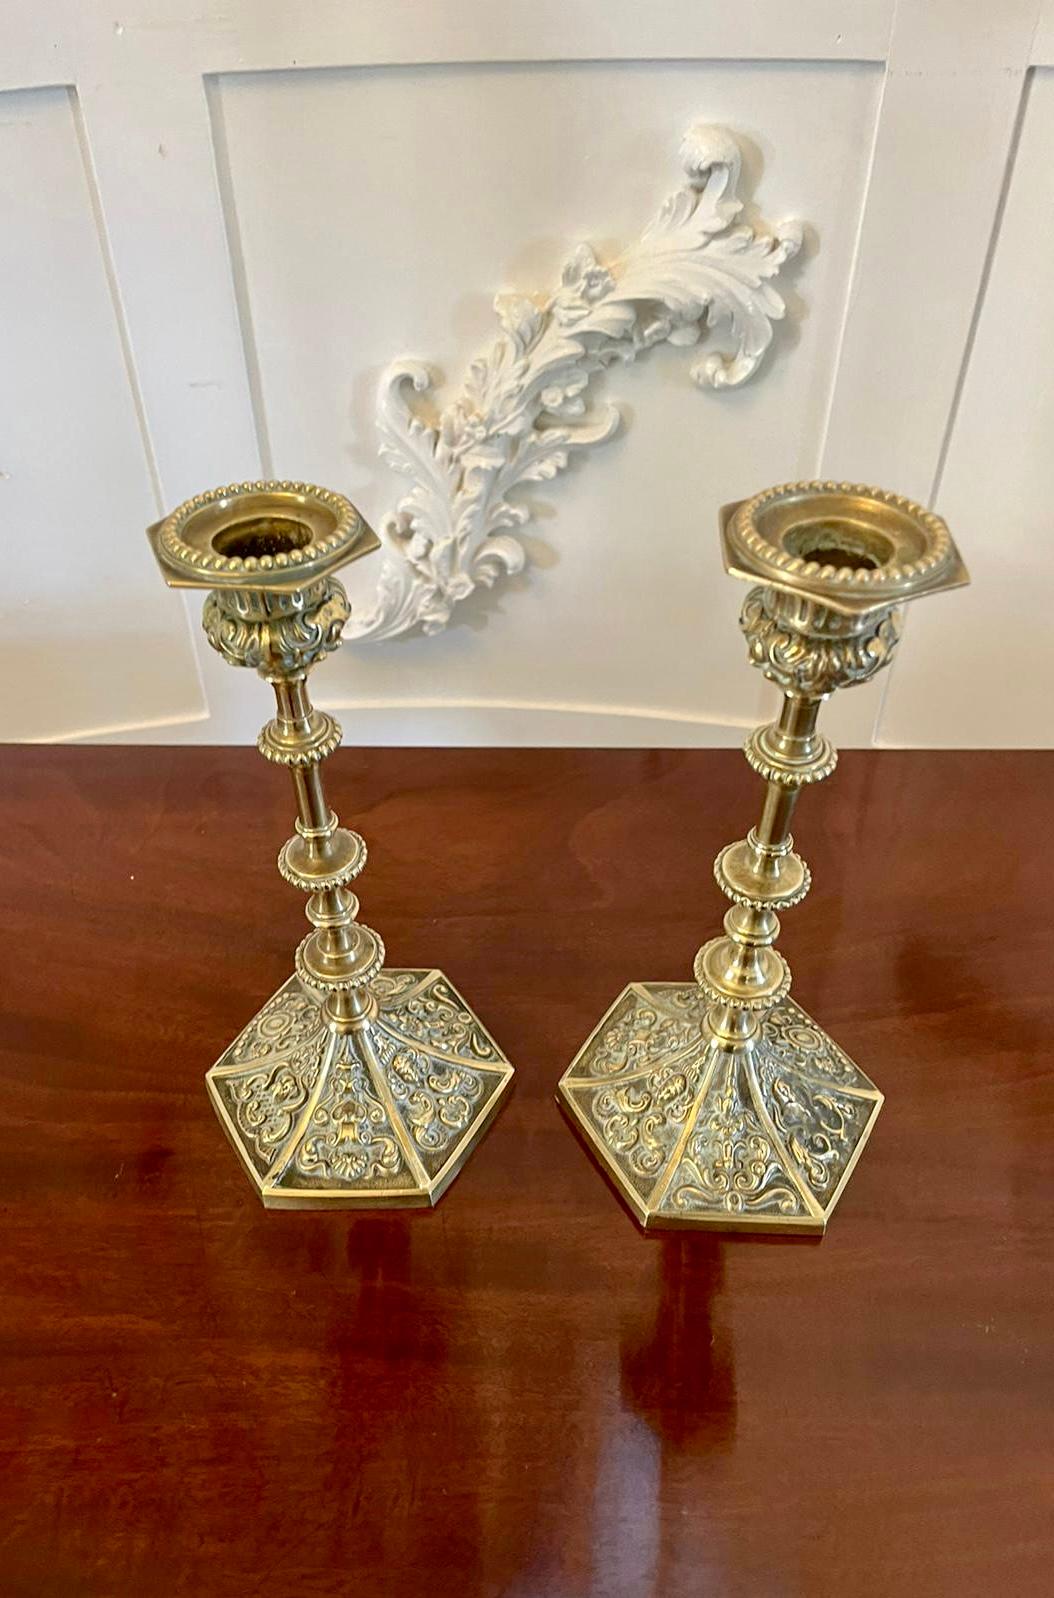 Outstanding quality 19th century antique French cast-brass desk set with a very attractive inkstand having twin inkwells and a beautiful pierced gallery. It has a rectangular pierced pen tray and a pair of ornate candlesticks.

A very decorative